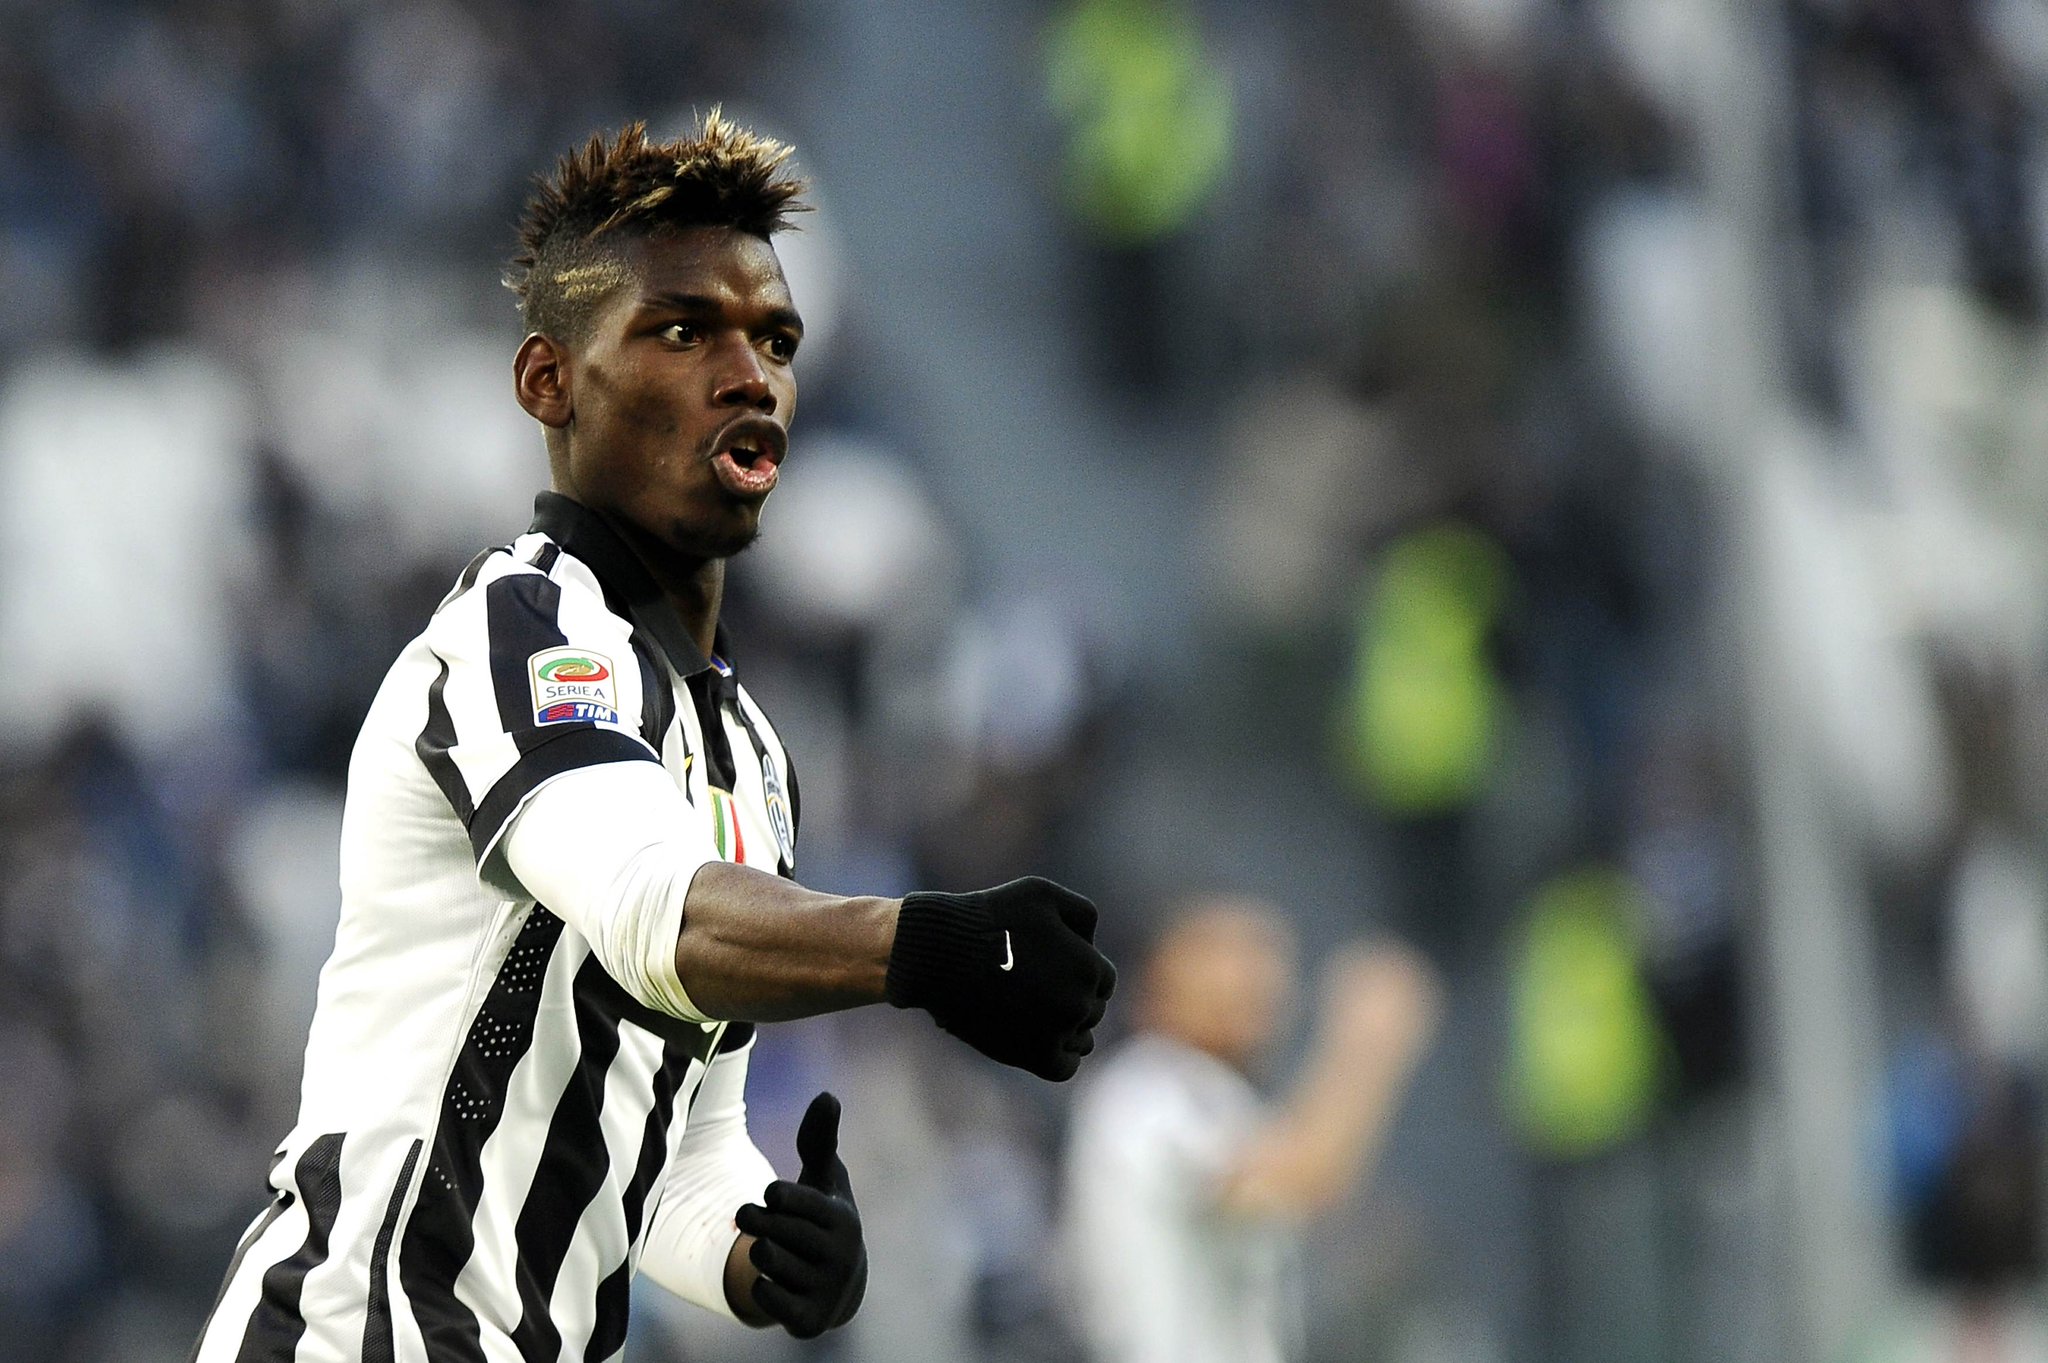 Happy 22nd birthday to Paul Pogba. No Serie A player has scored more goals from outside the box this season (4). 